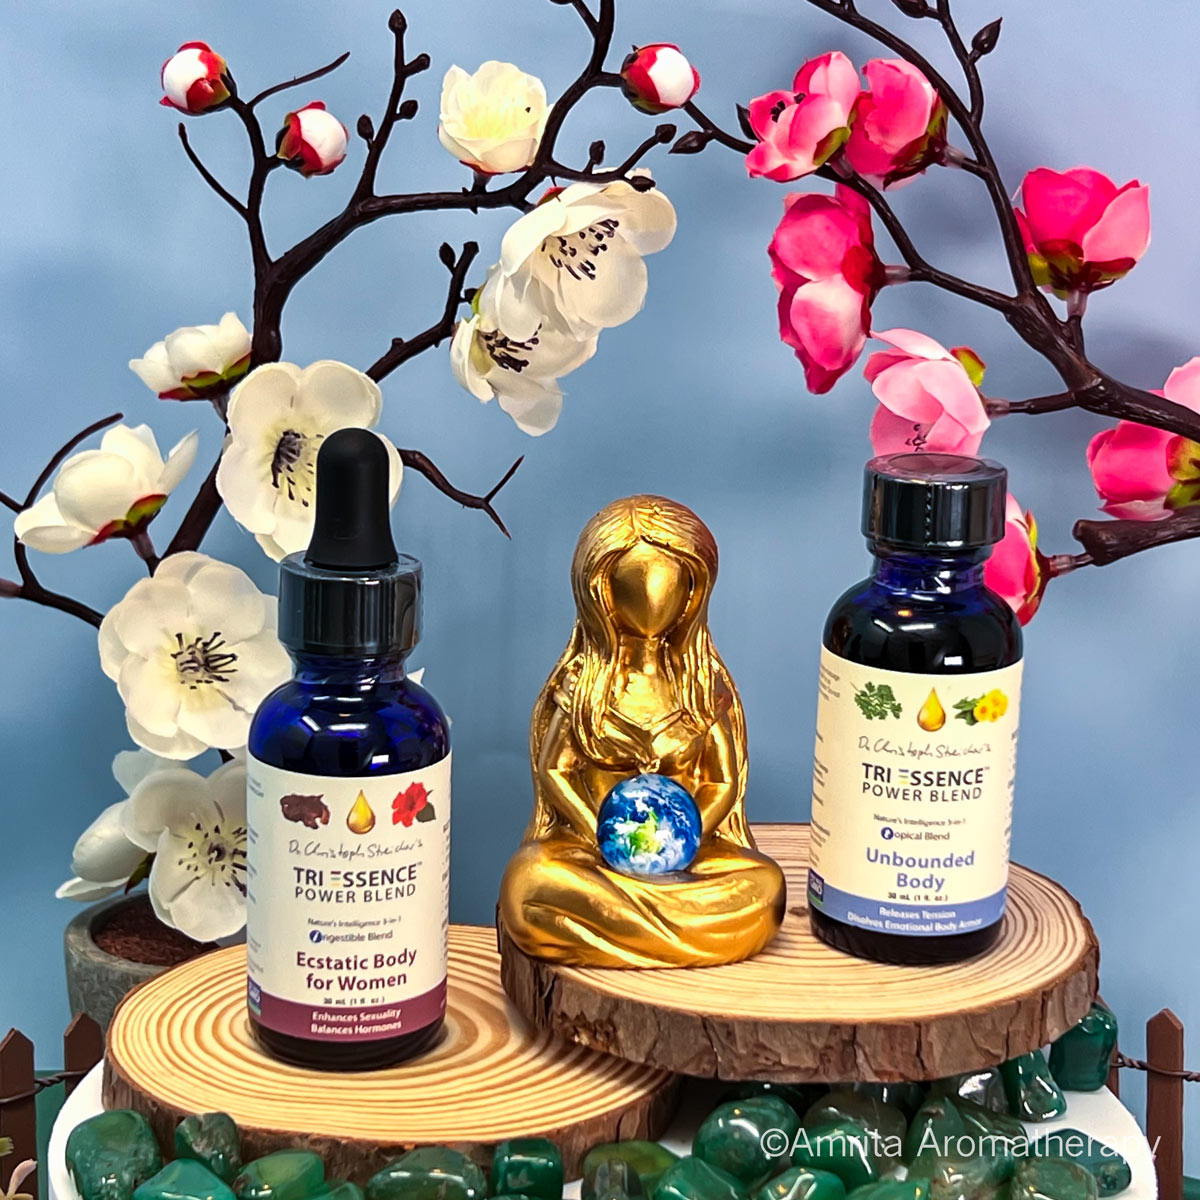 Click here to shop for all Tri-Essence Power Blends